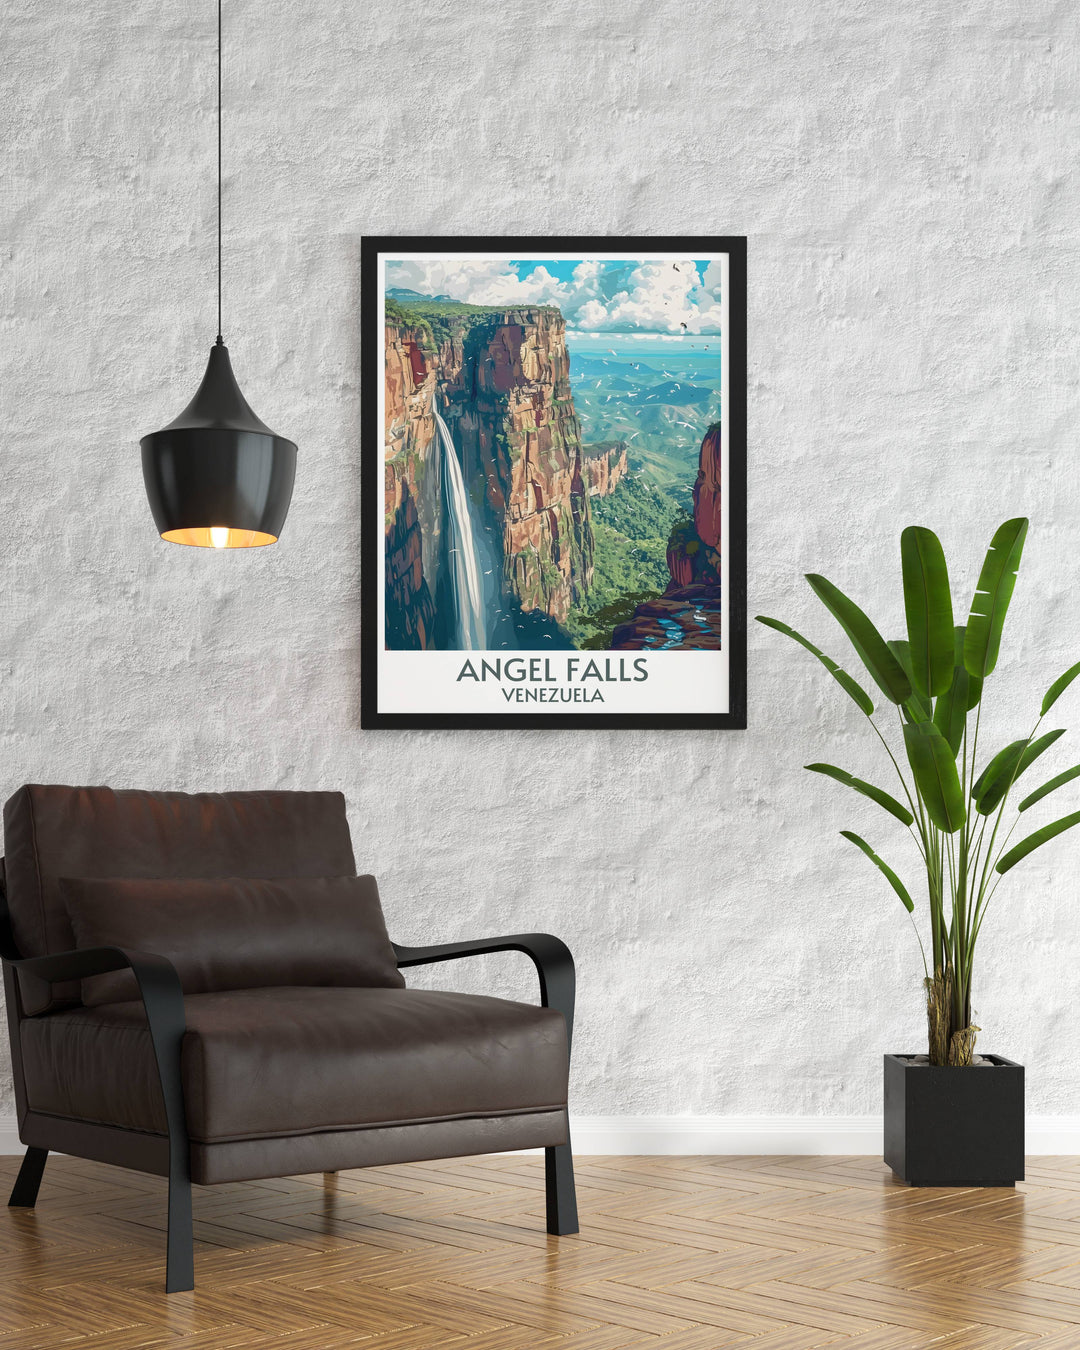 Gift a piece of Venezuela with this exquisite print featuring Auyan tepui and Angel Falls, ideal for marking special occasions with a touch of adventure.